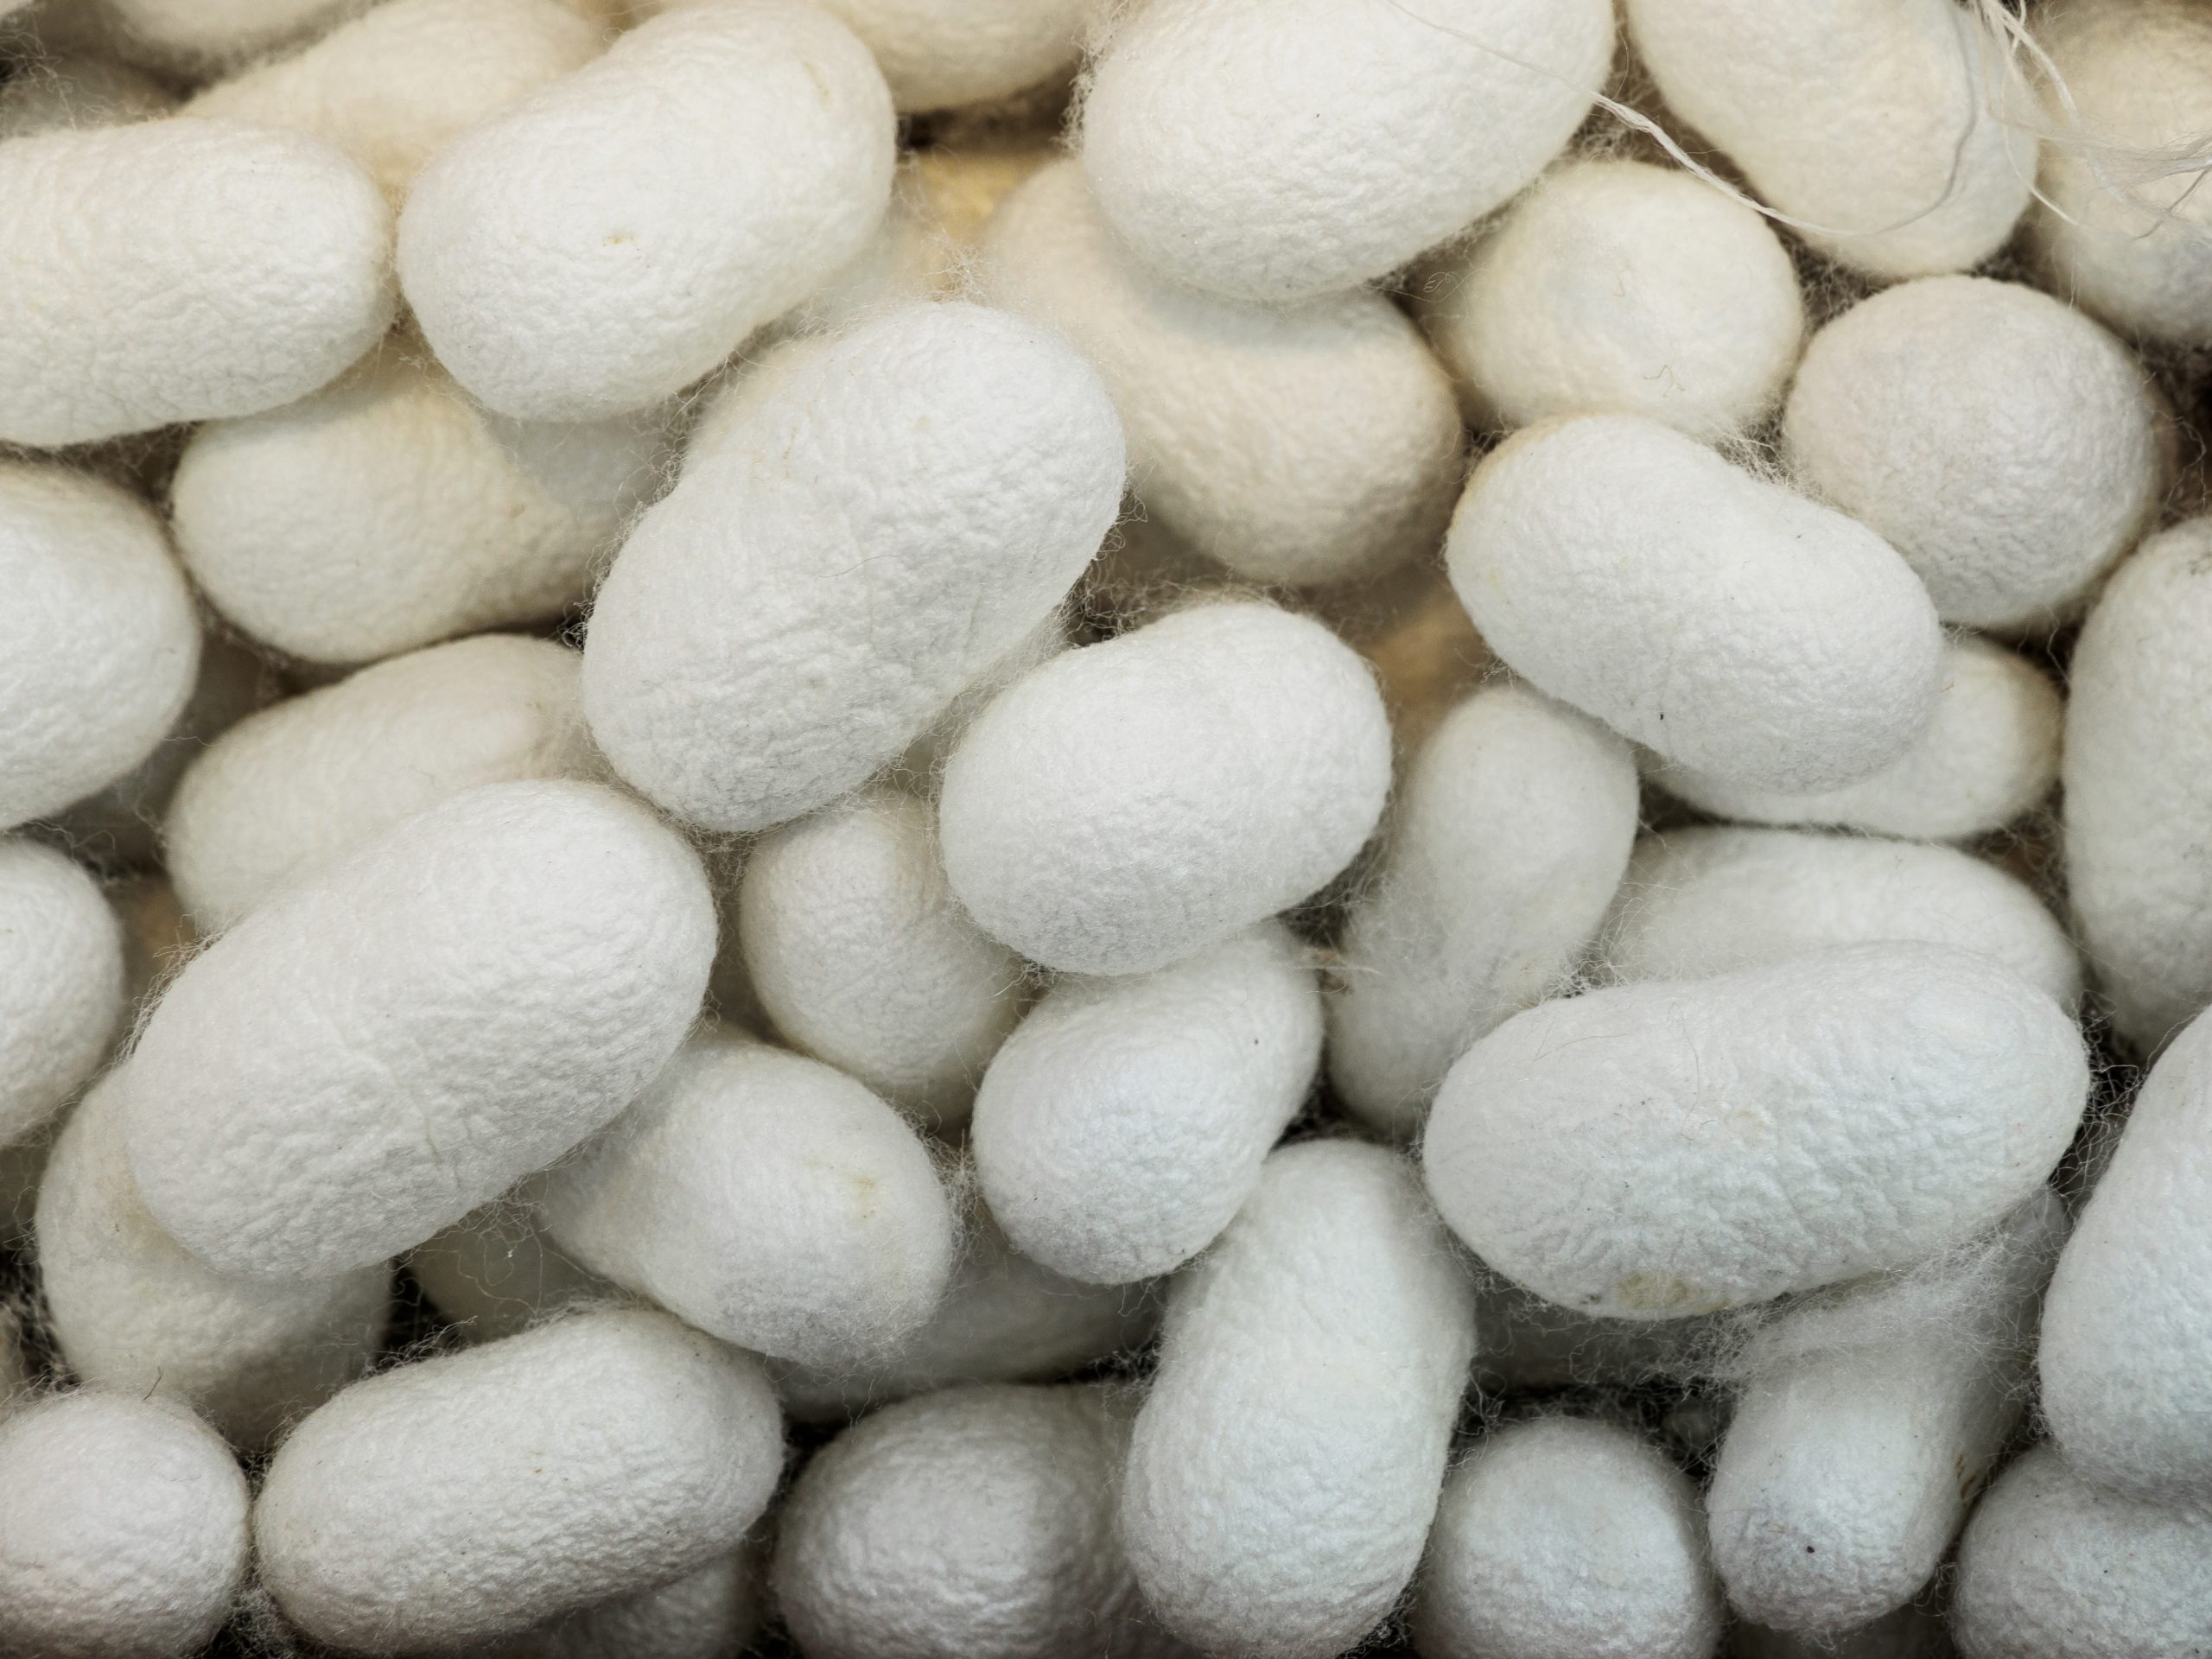 Silkworm cocoons are processed at the Bombyx factory in China.